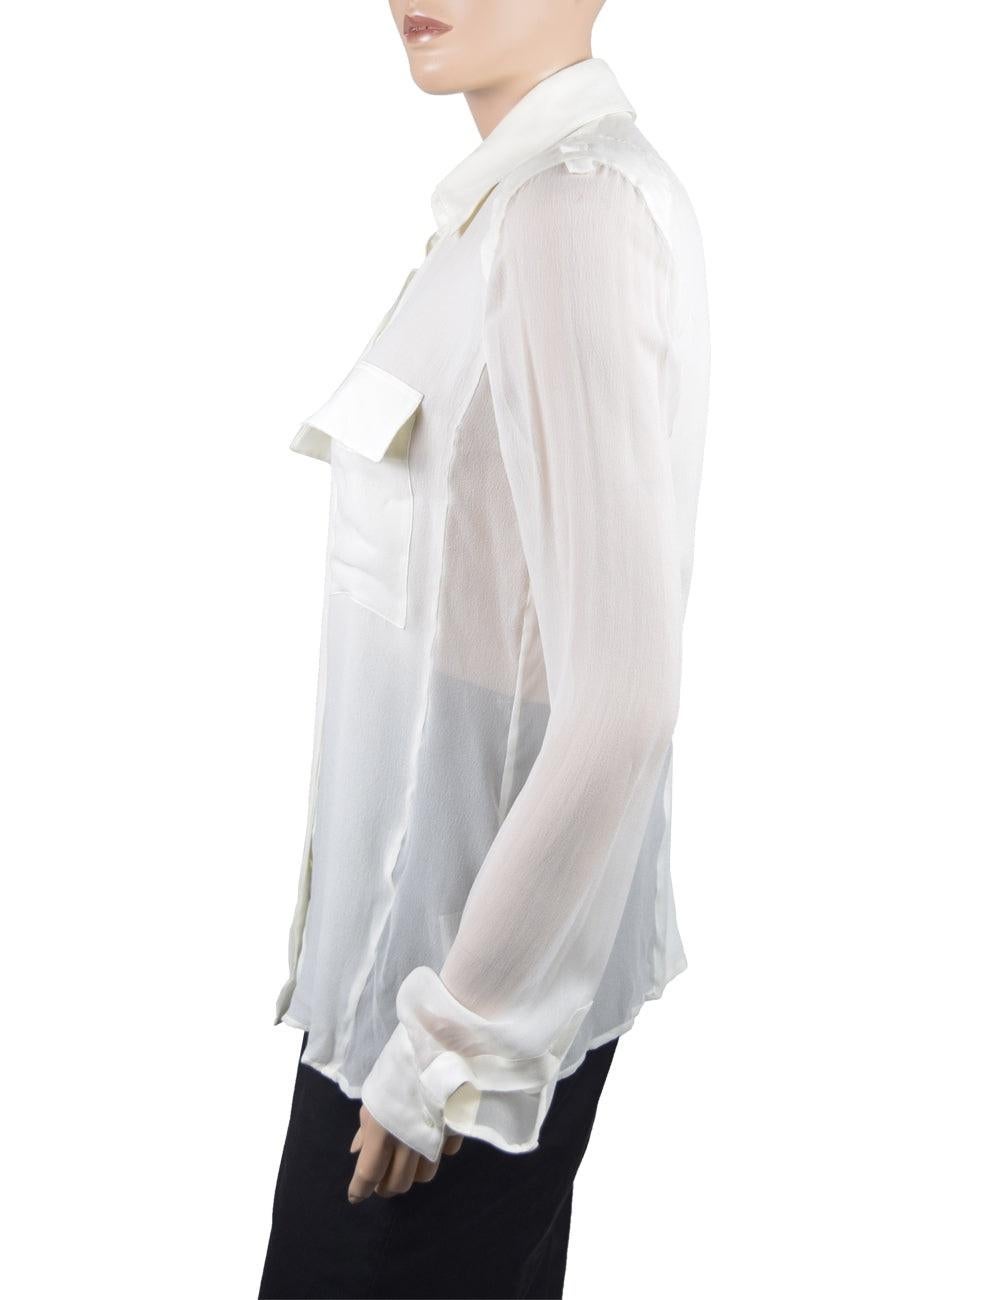 Tom Ford White Sheer Sleeve Silk Button Up Blouse

Additional information:
Material: Silk
Size: IT 44
Overall Condition: Excellent